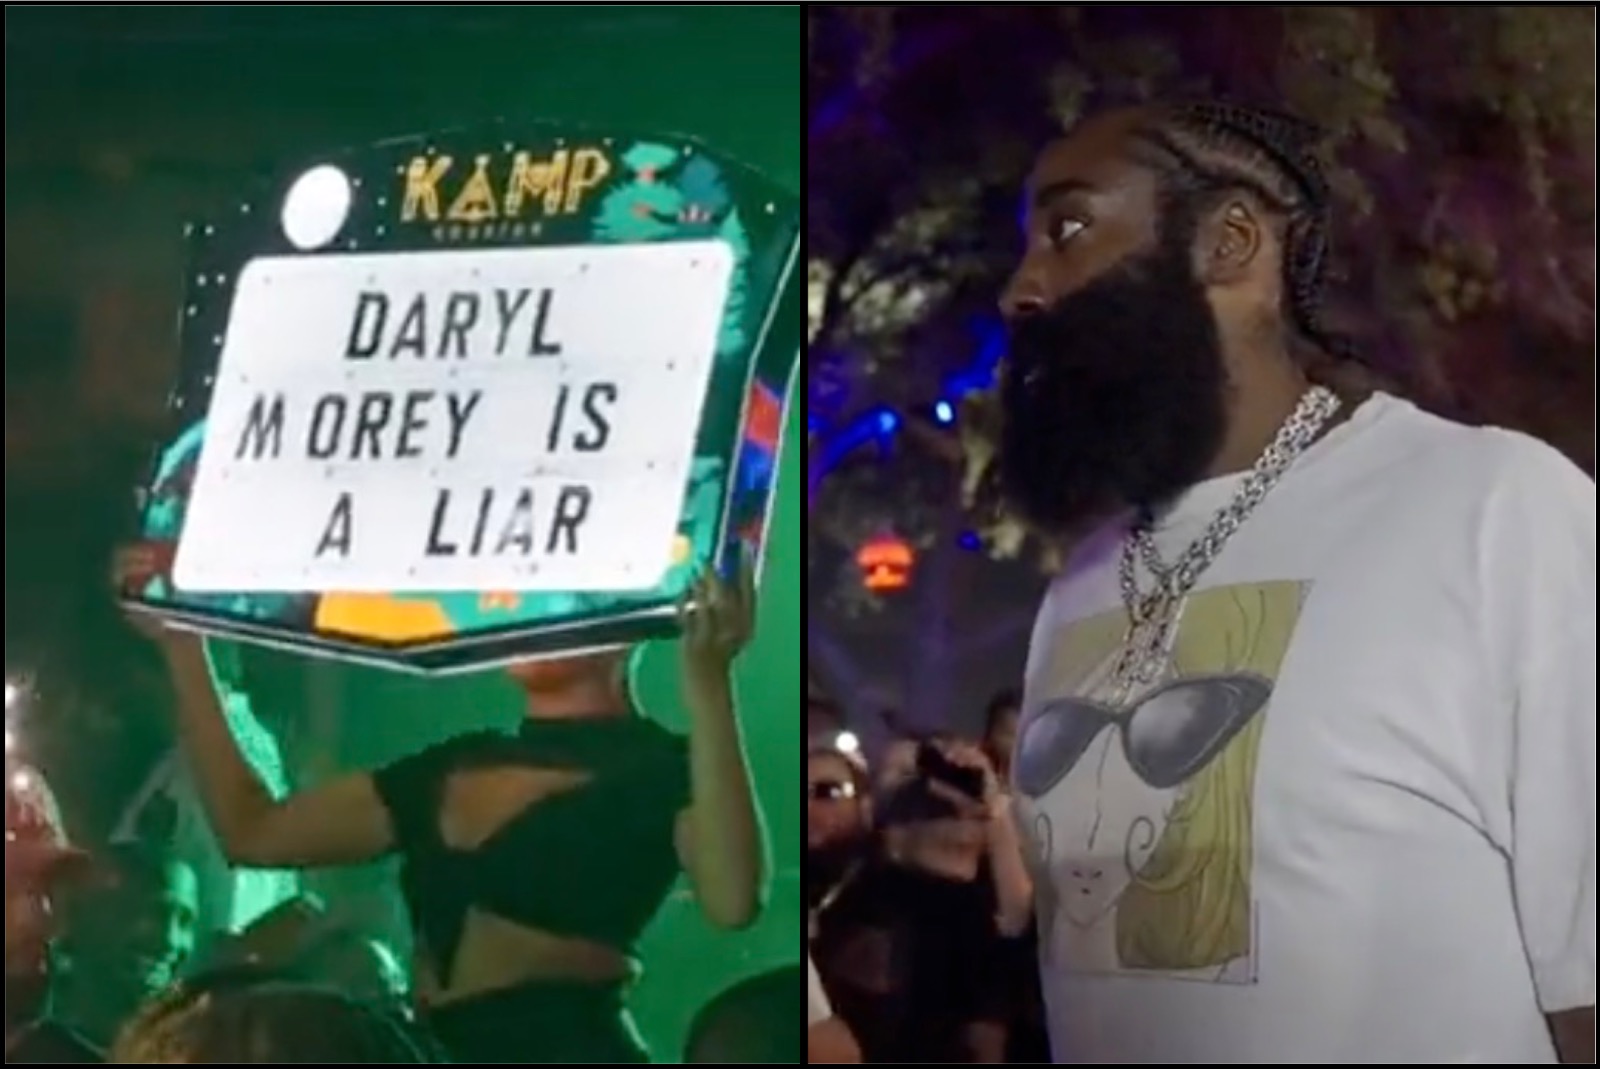 James Harden Throws Party at Houston Club and Has Bottle Girls Hold Up “Daryl Morey is a Liar” Signs